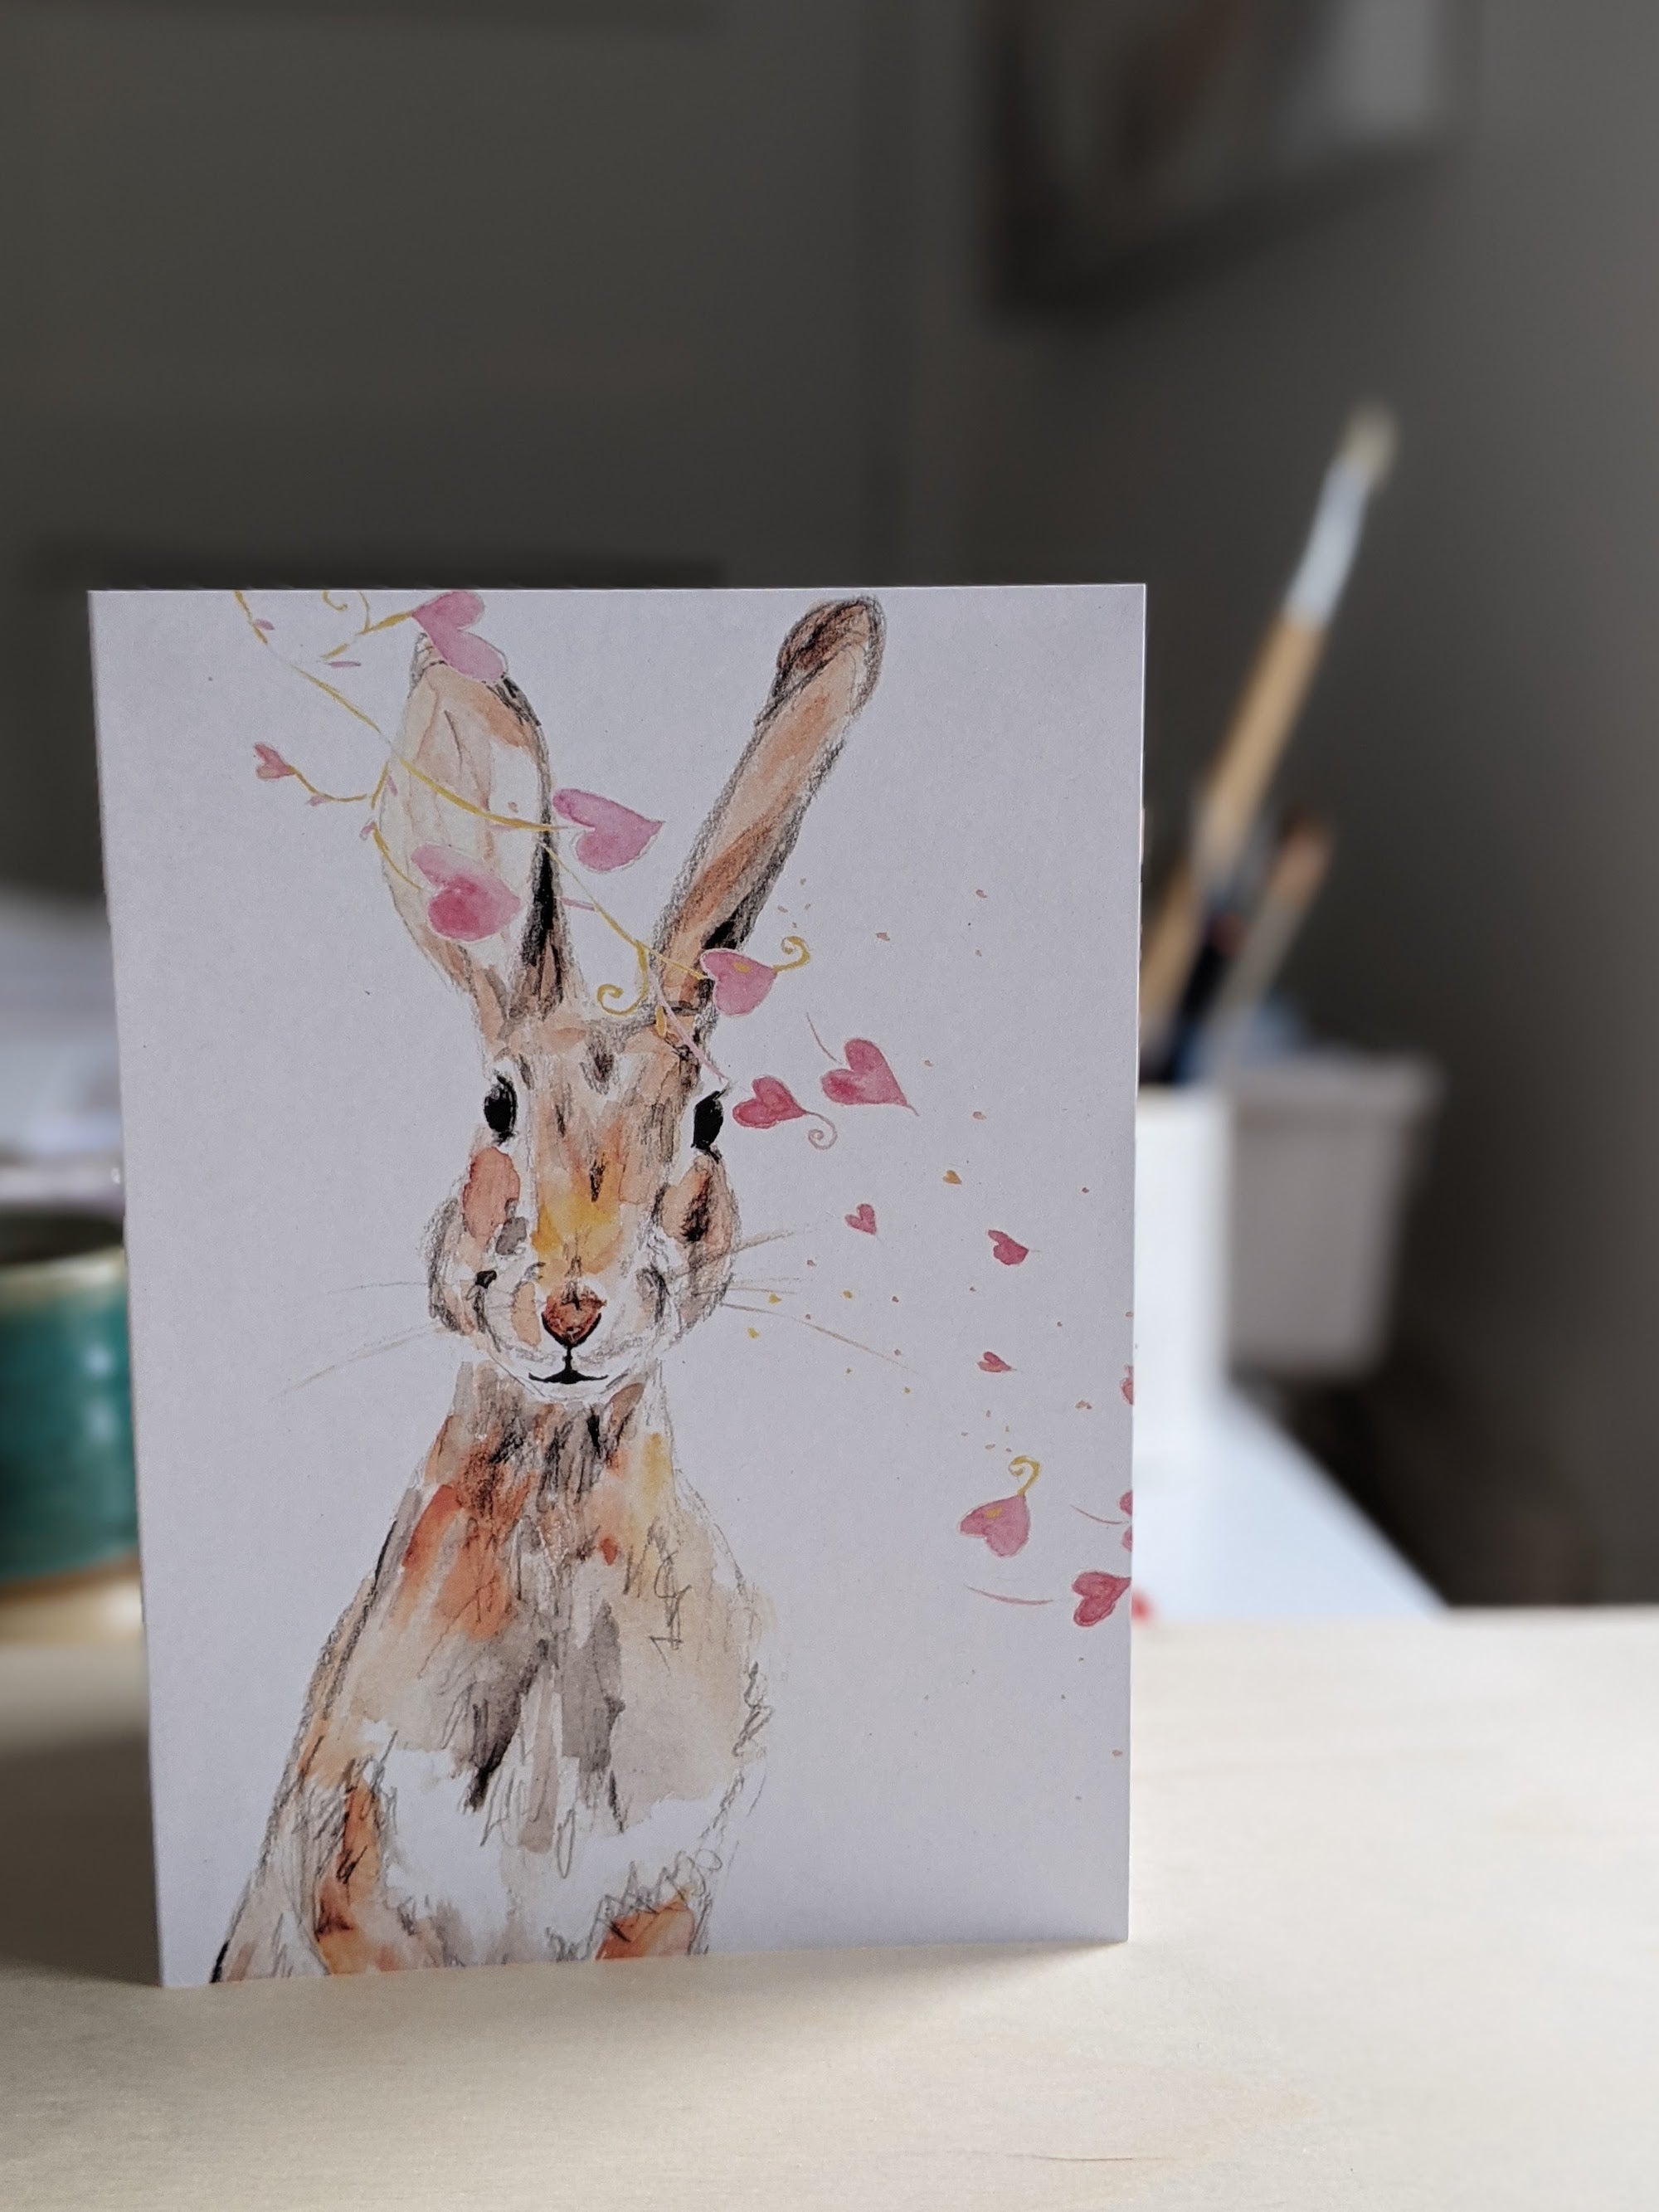 Hare love Greeting card, all occasions card, bunny rabbit greeting card